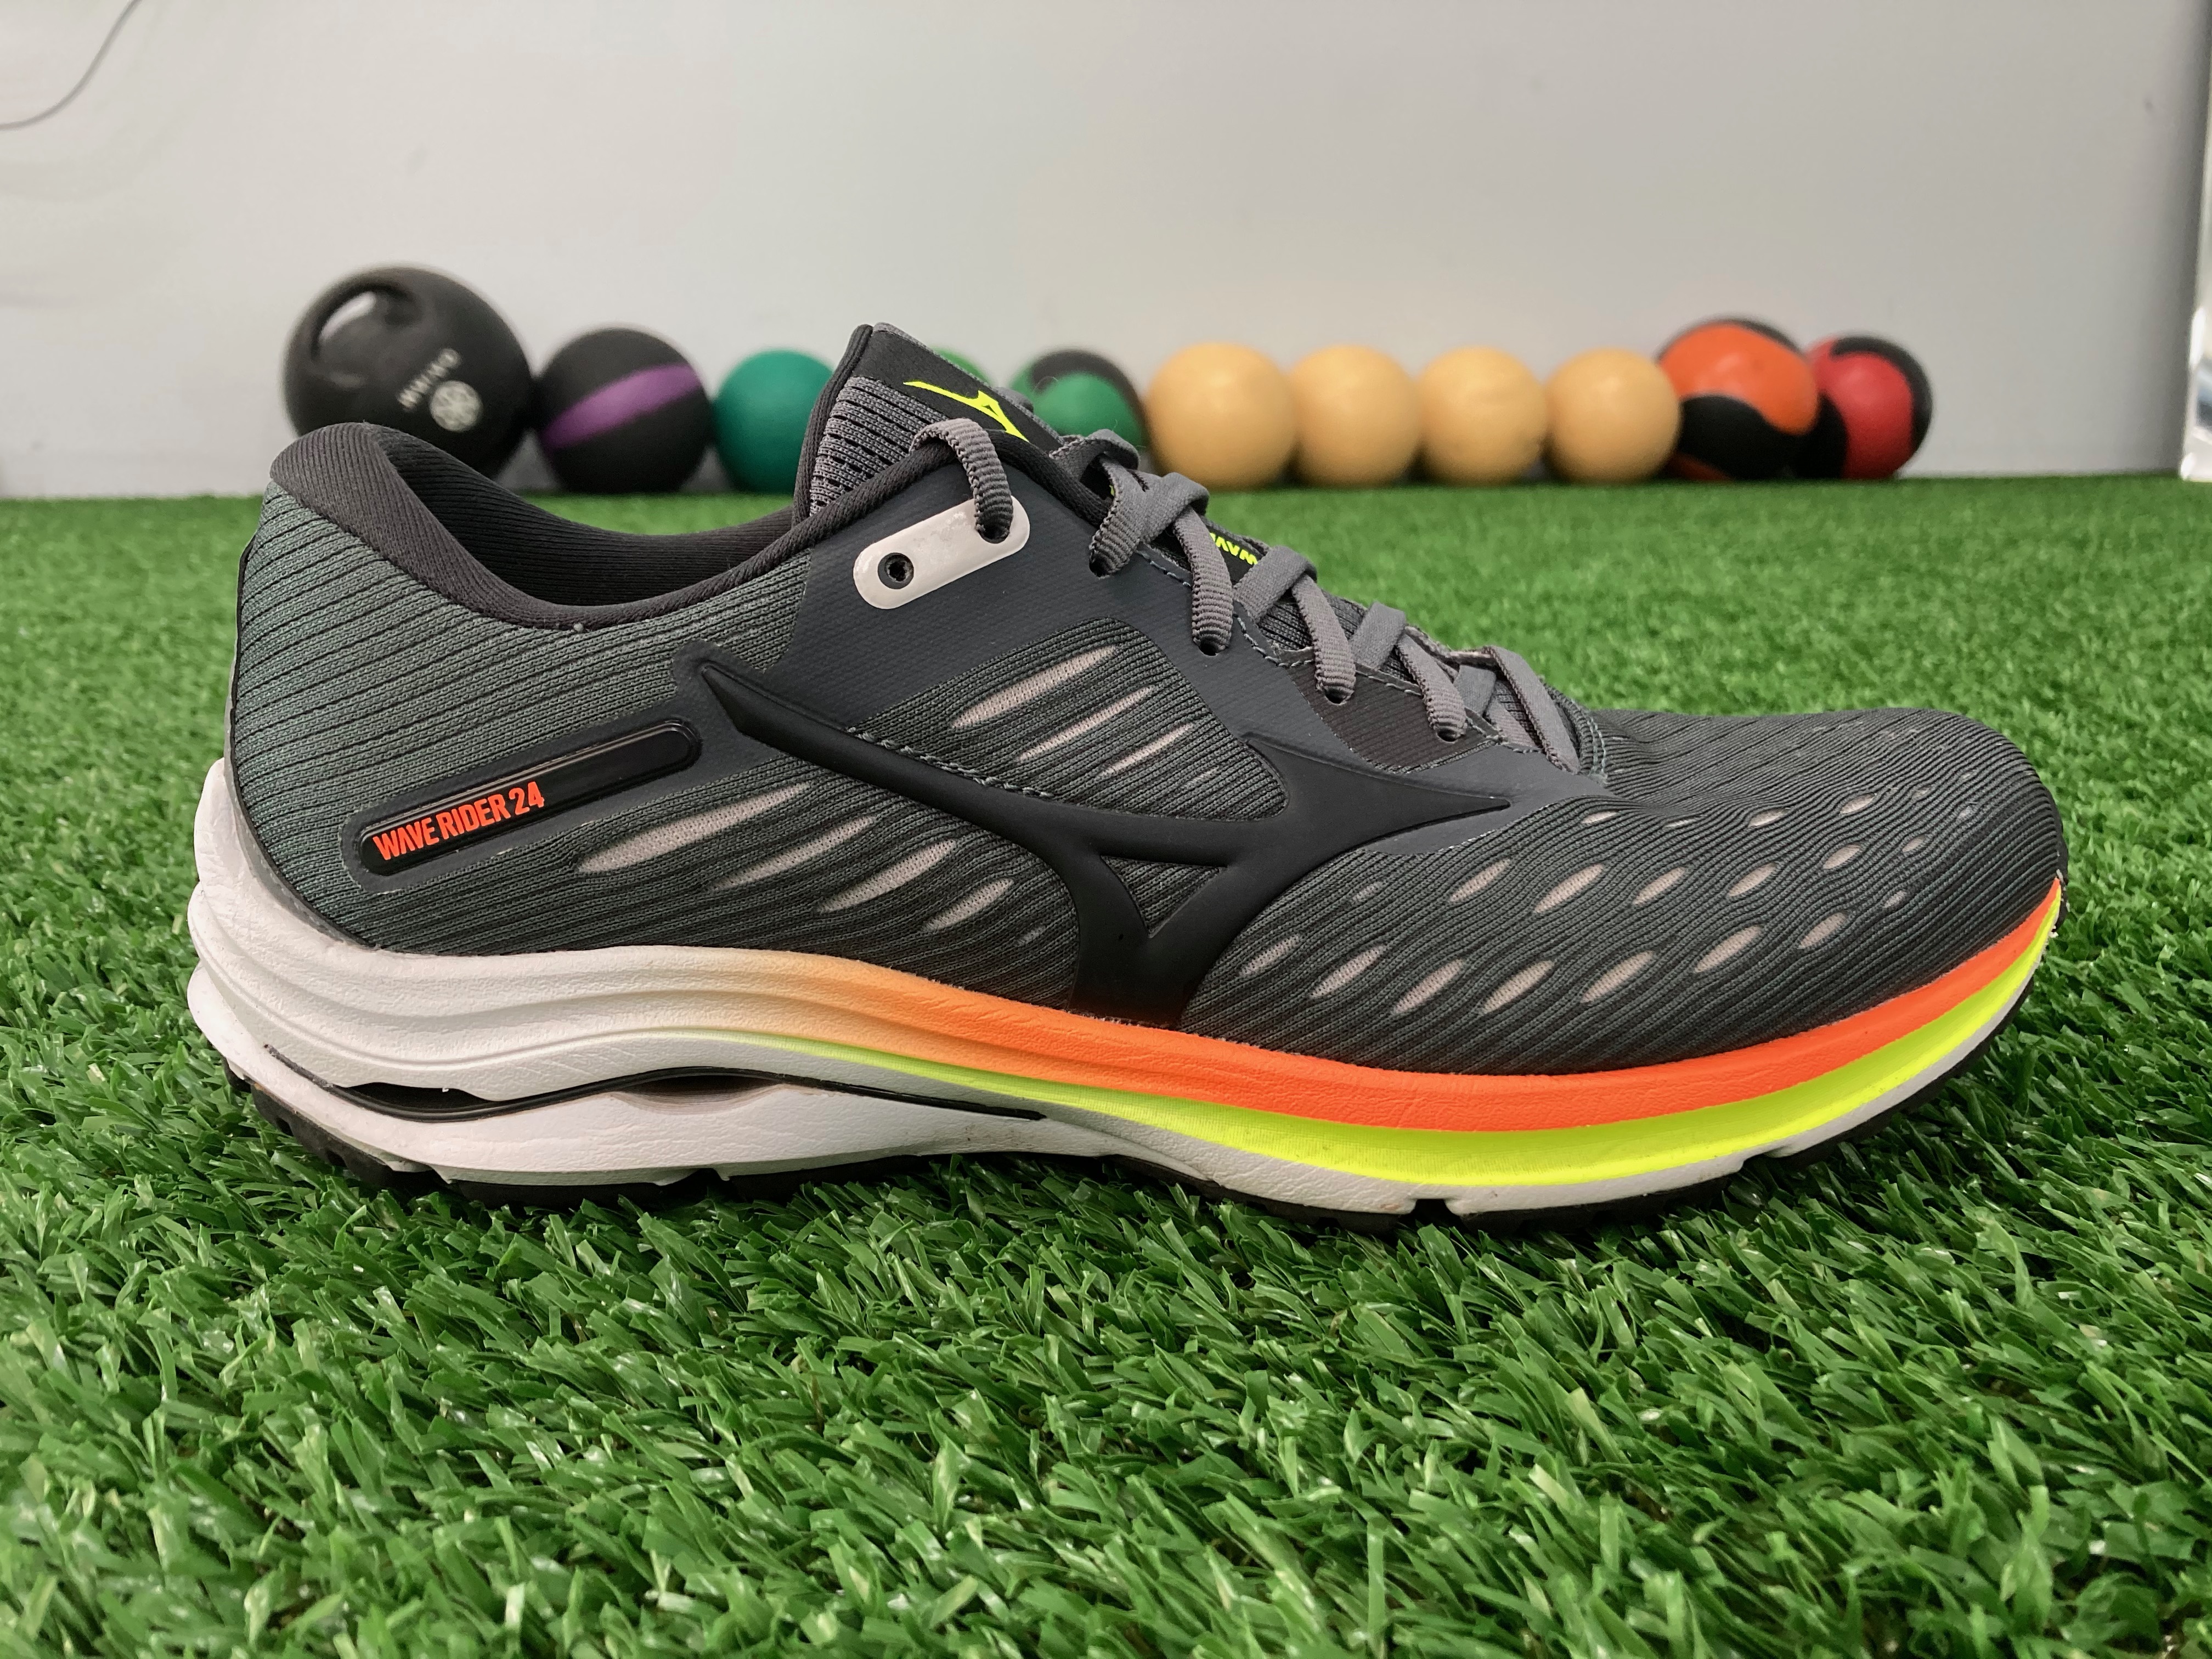 Mizuno Wave Rider 24 Mesh Multiple Tester Review - DOCTORS OF RUNNING